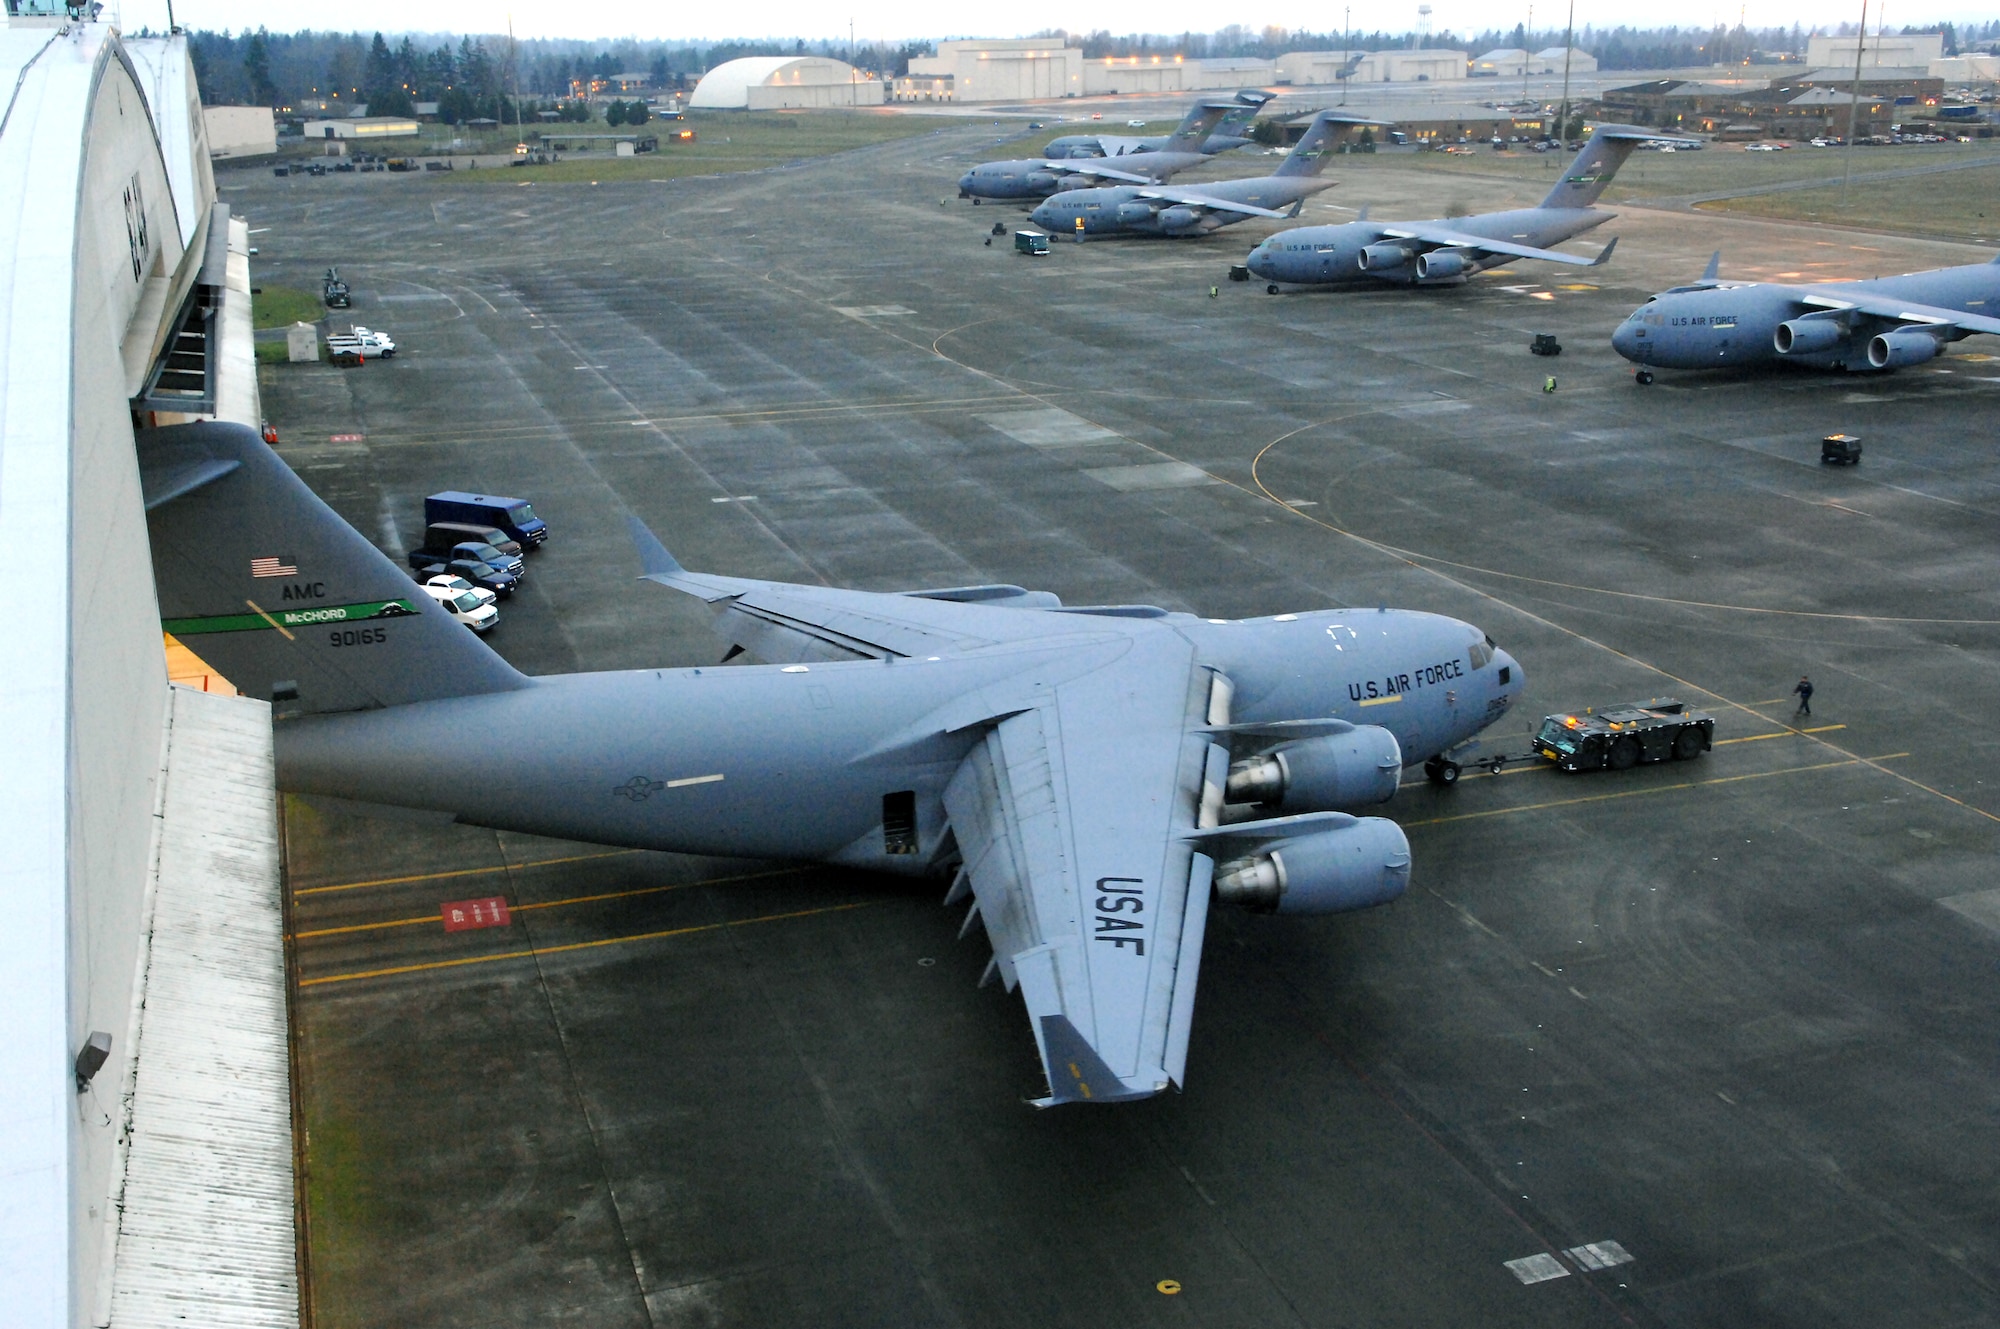 A C-17 Globemaster III is towed into a hangar using an MB-2 aircraft tow tractor Jan. 26 for a home station inspection at McChord Air Force Base, Wash. Airmen from McChord AFB provide airlift and aeromedical evacuation in support of the war on terrorism and other contingencies around the world. (U.S. Air Force photo/Abner Guzman)
